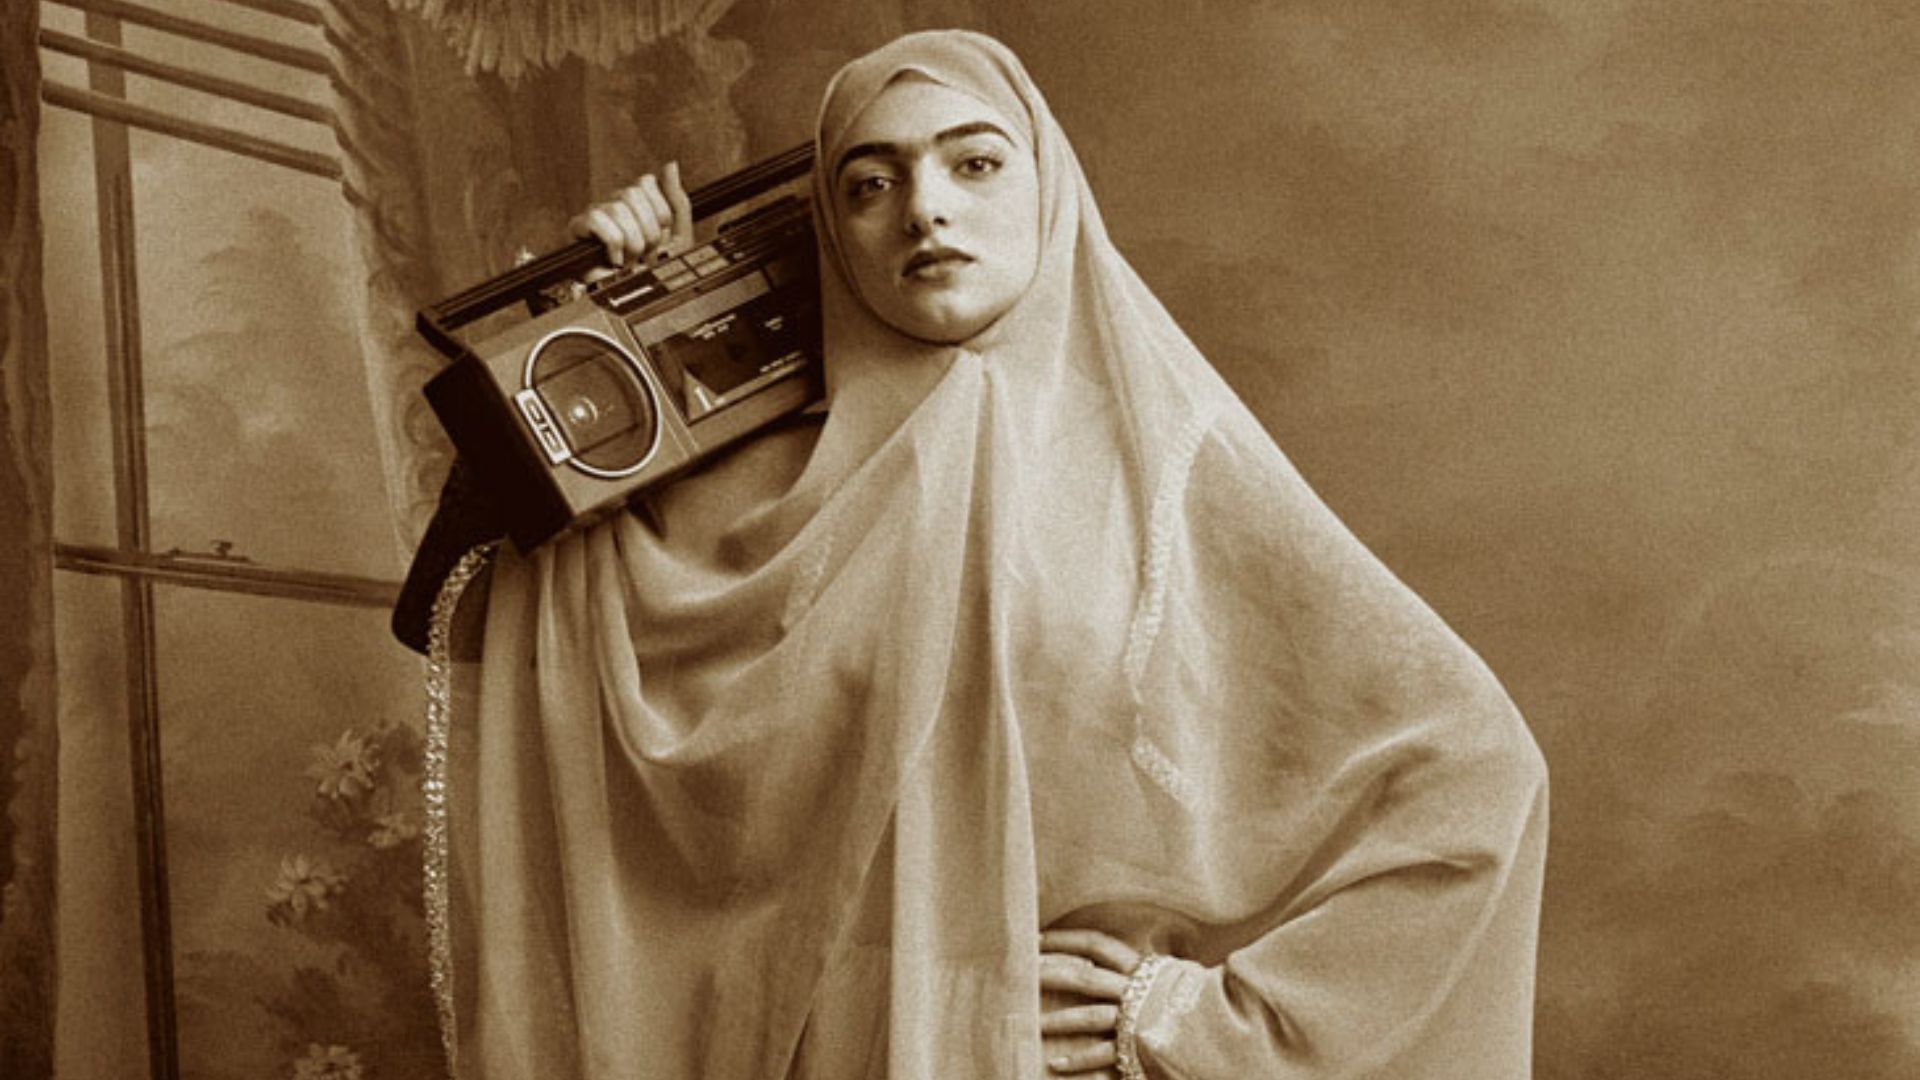 Image of an Iranian woman holding a boom box stereo